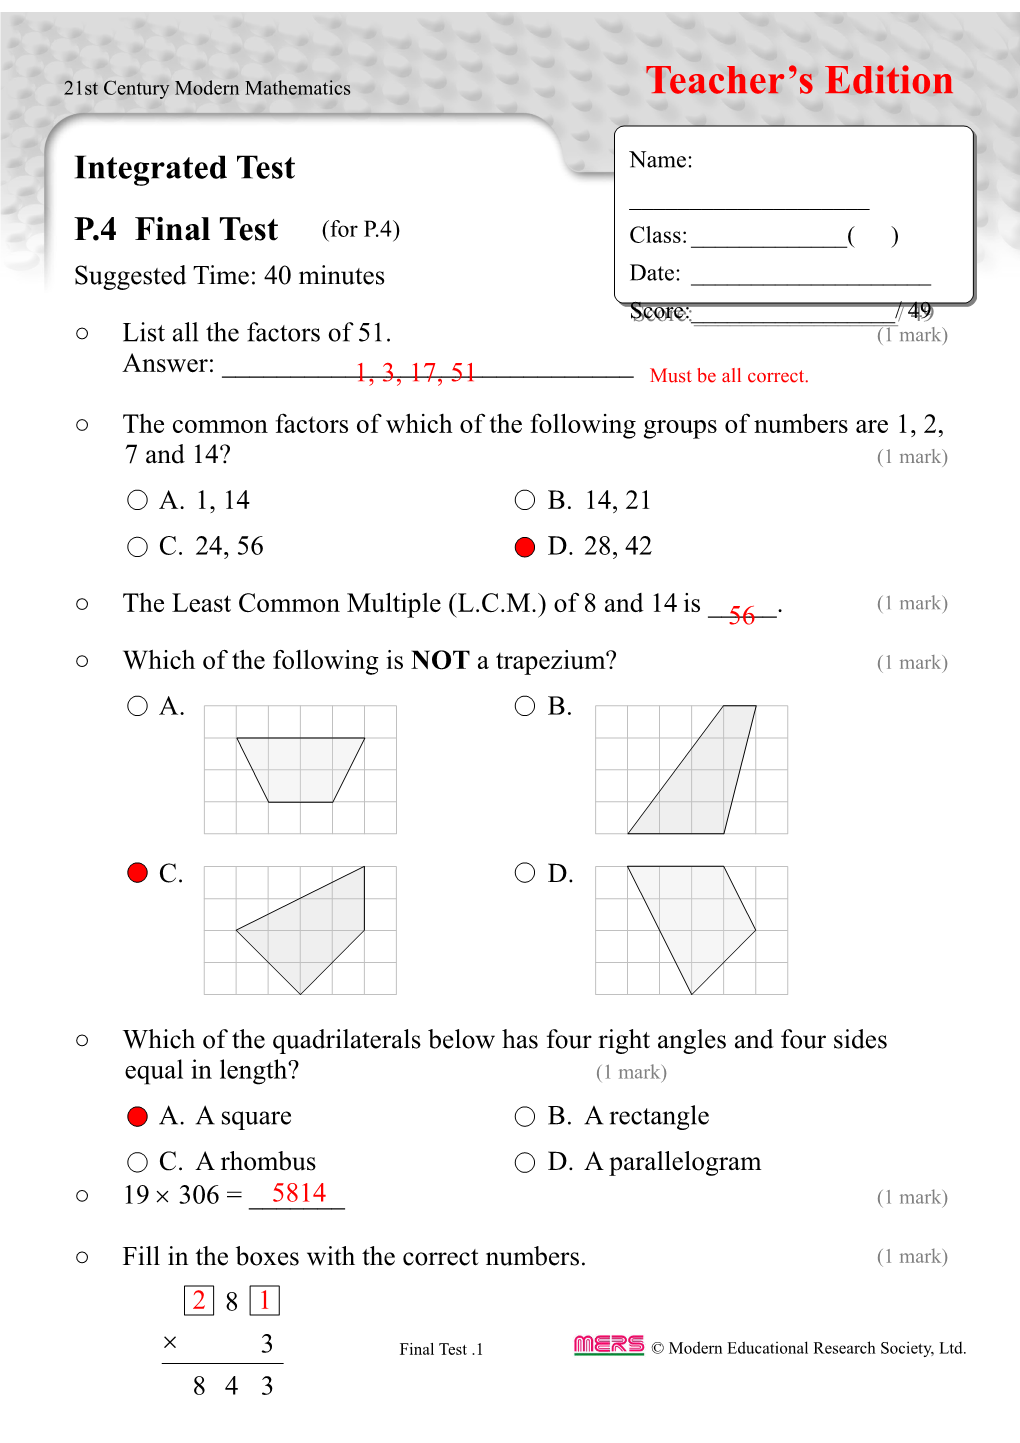 P.4 Final Test(For P.4)